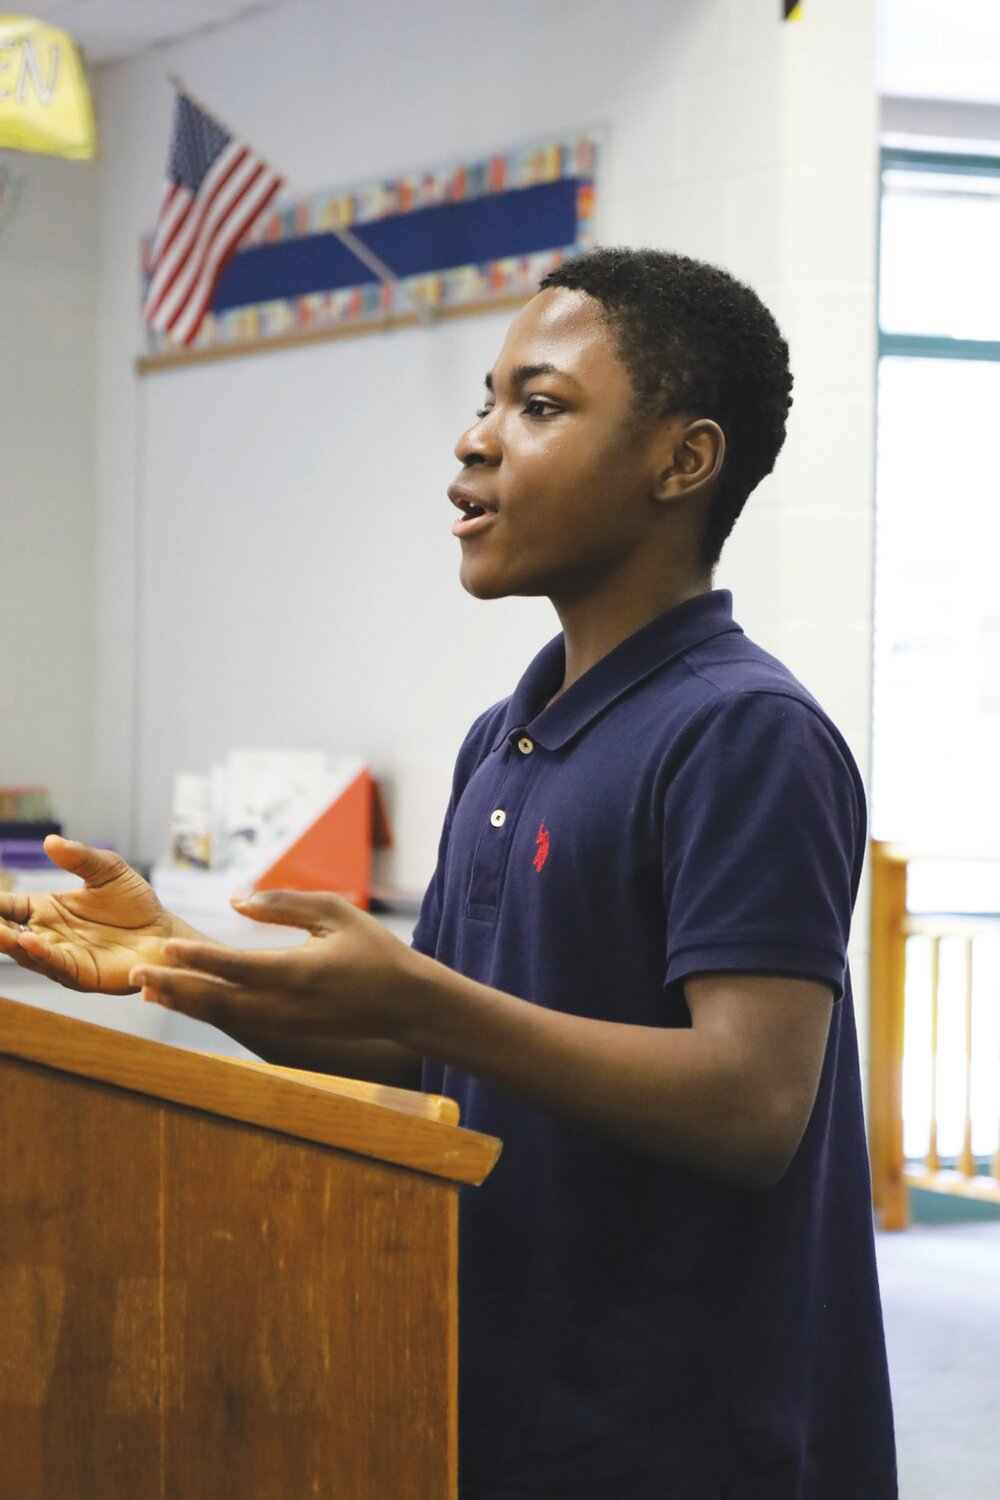 Miguel Degbor, Runner-Up, Osceola Middle School during Incubate Debate's tri-county tournament May 23.